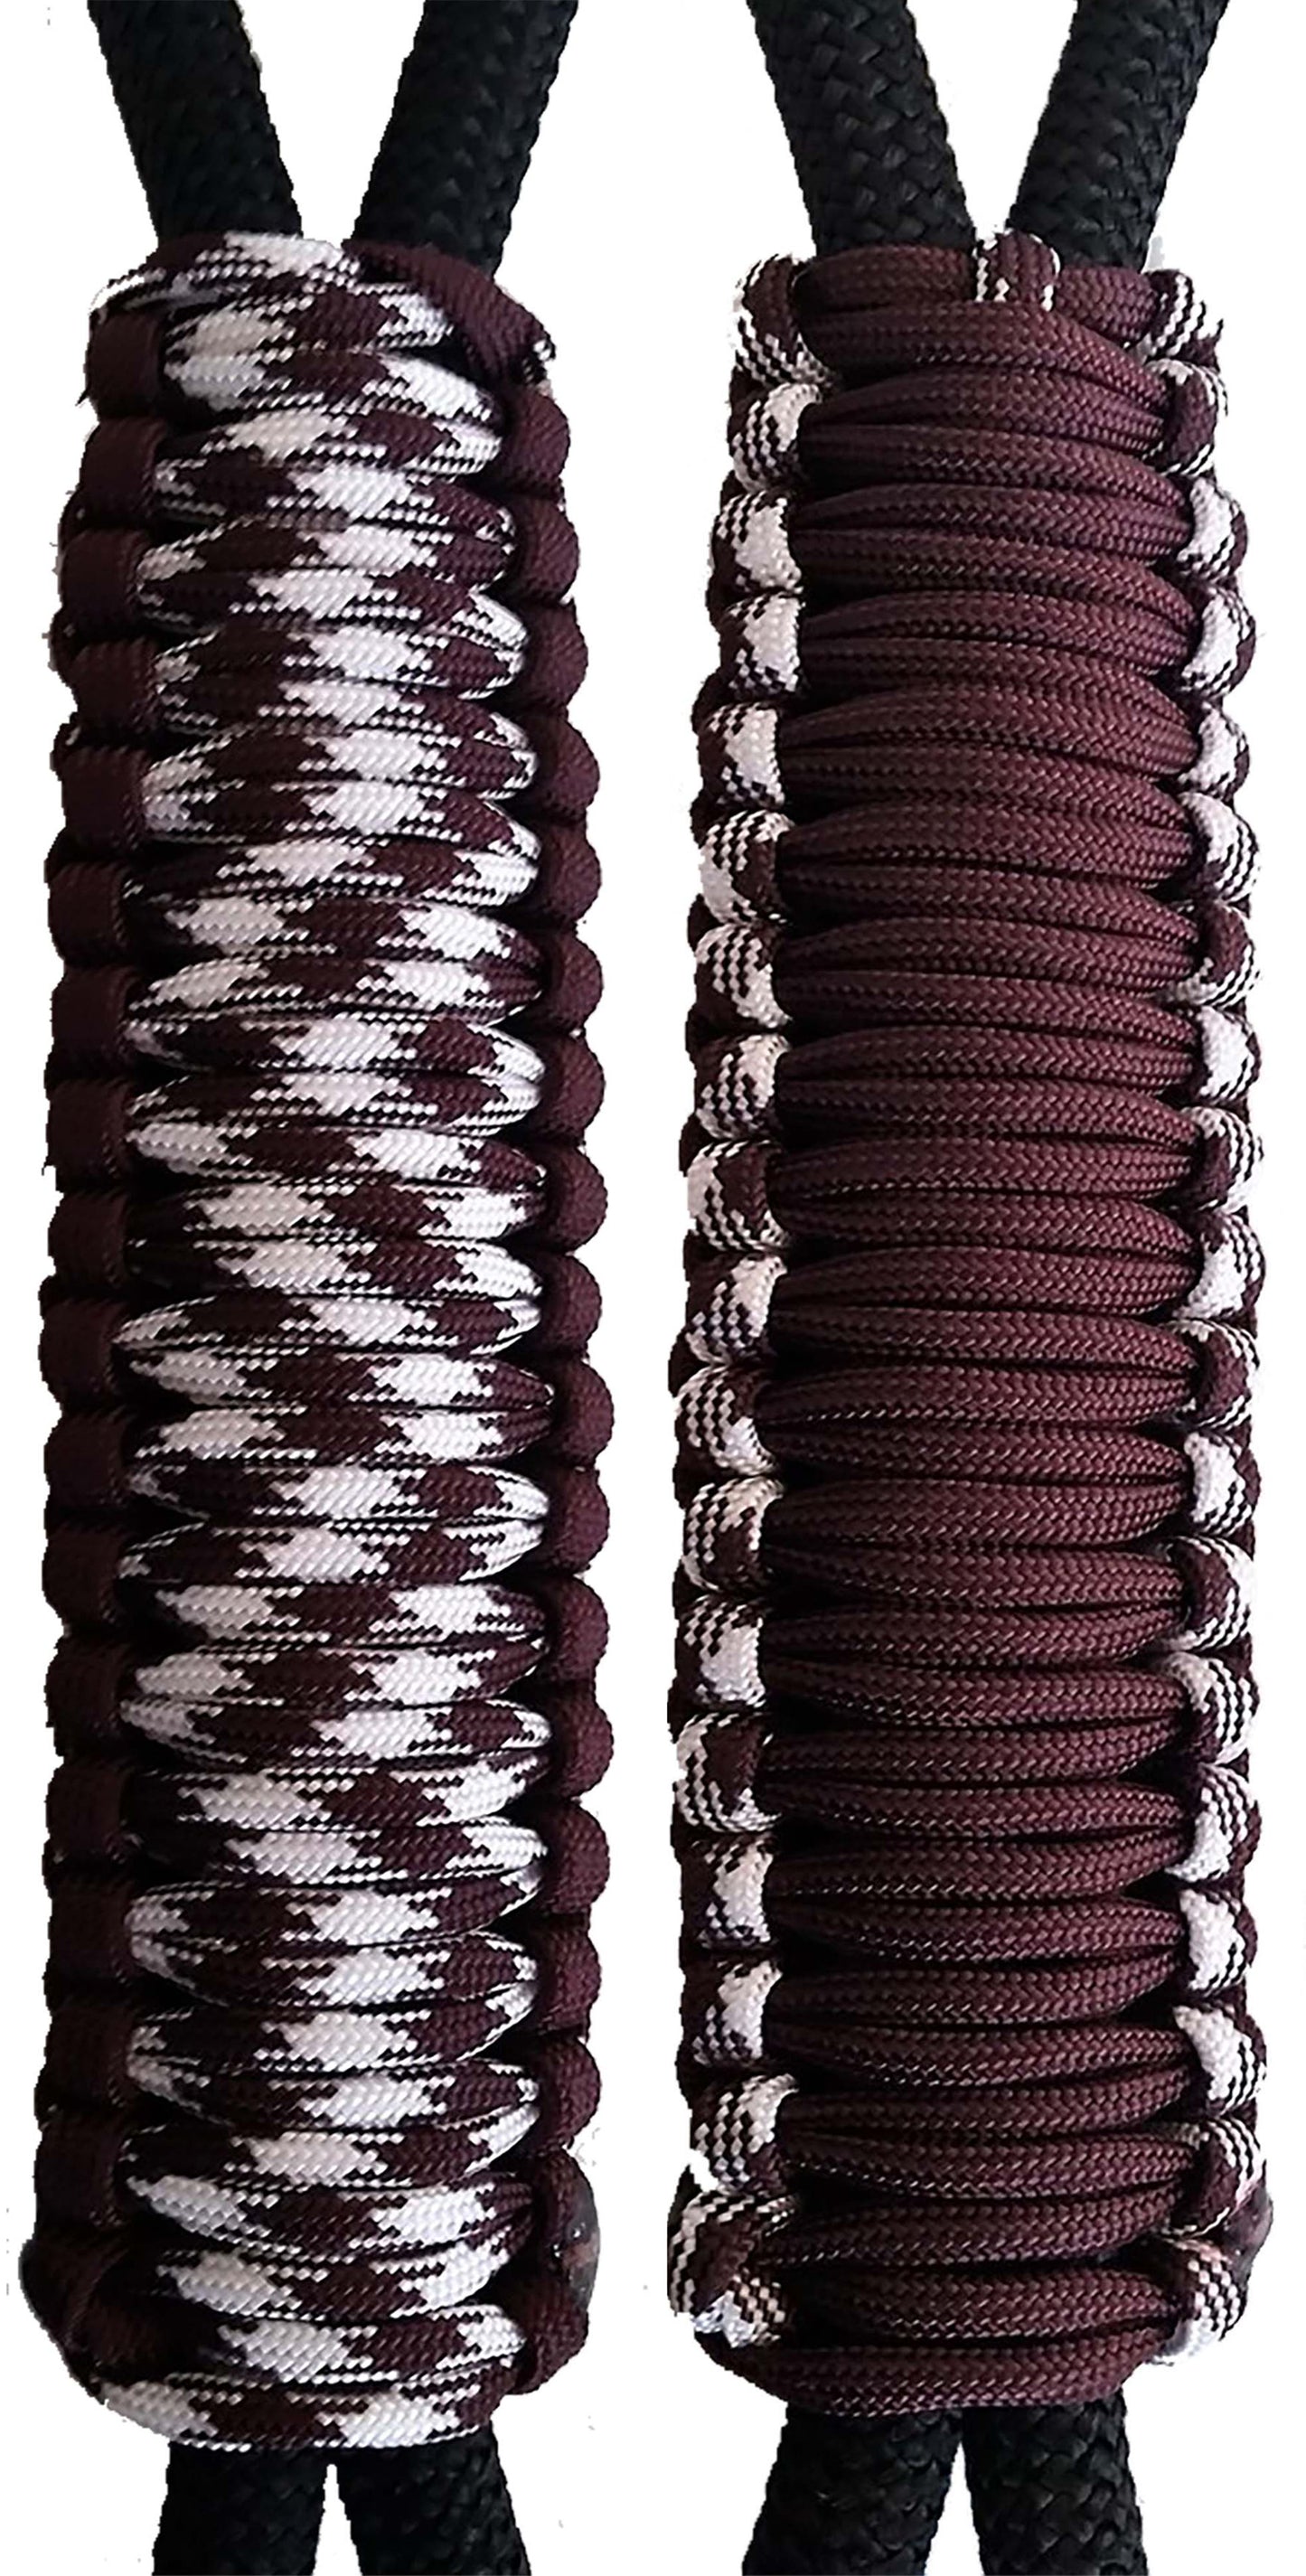 Maroon & Maroon Hounds Tooth C06AC040 - Paracord Handmade Handles for Stainless Steel Tumblers - Made in USA!